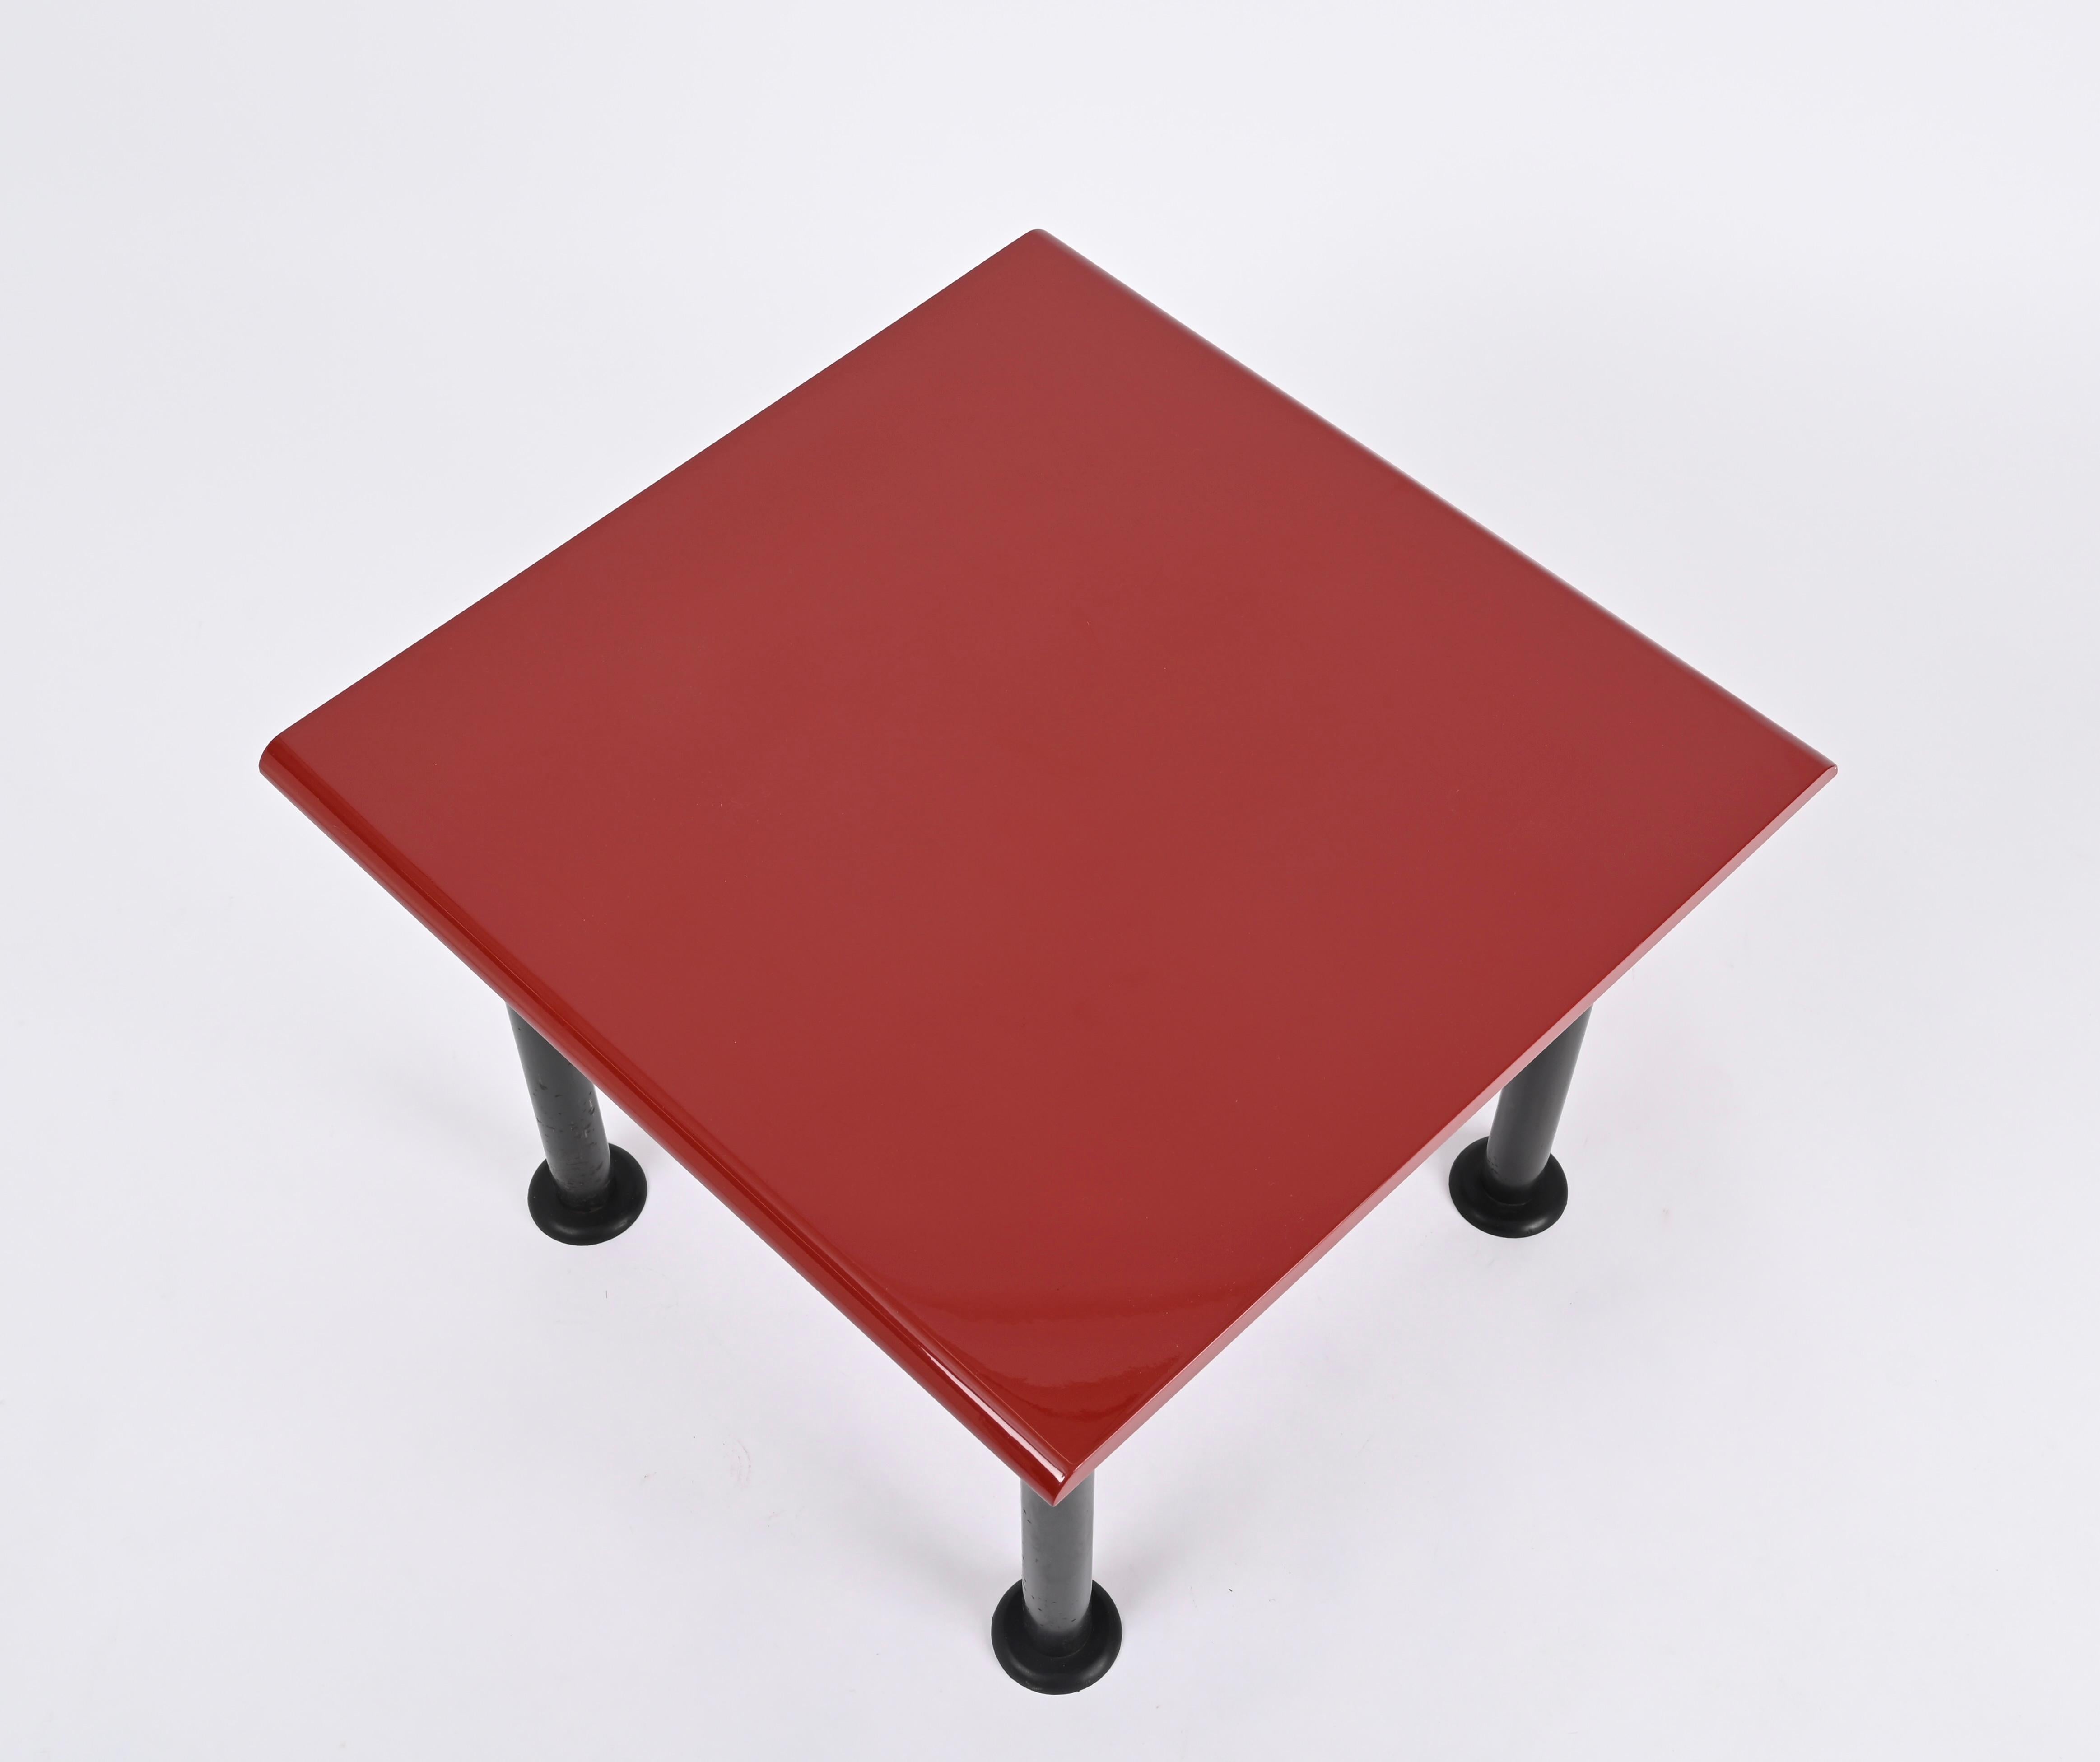 Midcentury Memphis Style Square Coffee Table with Cardinal Red Top, Italy 1980s For Sale 1